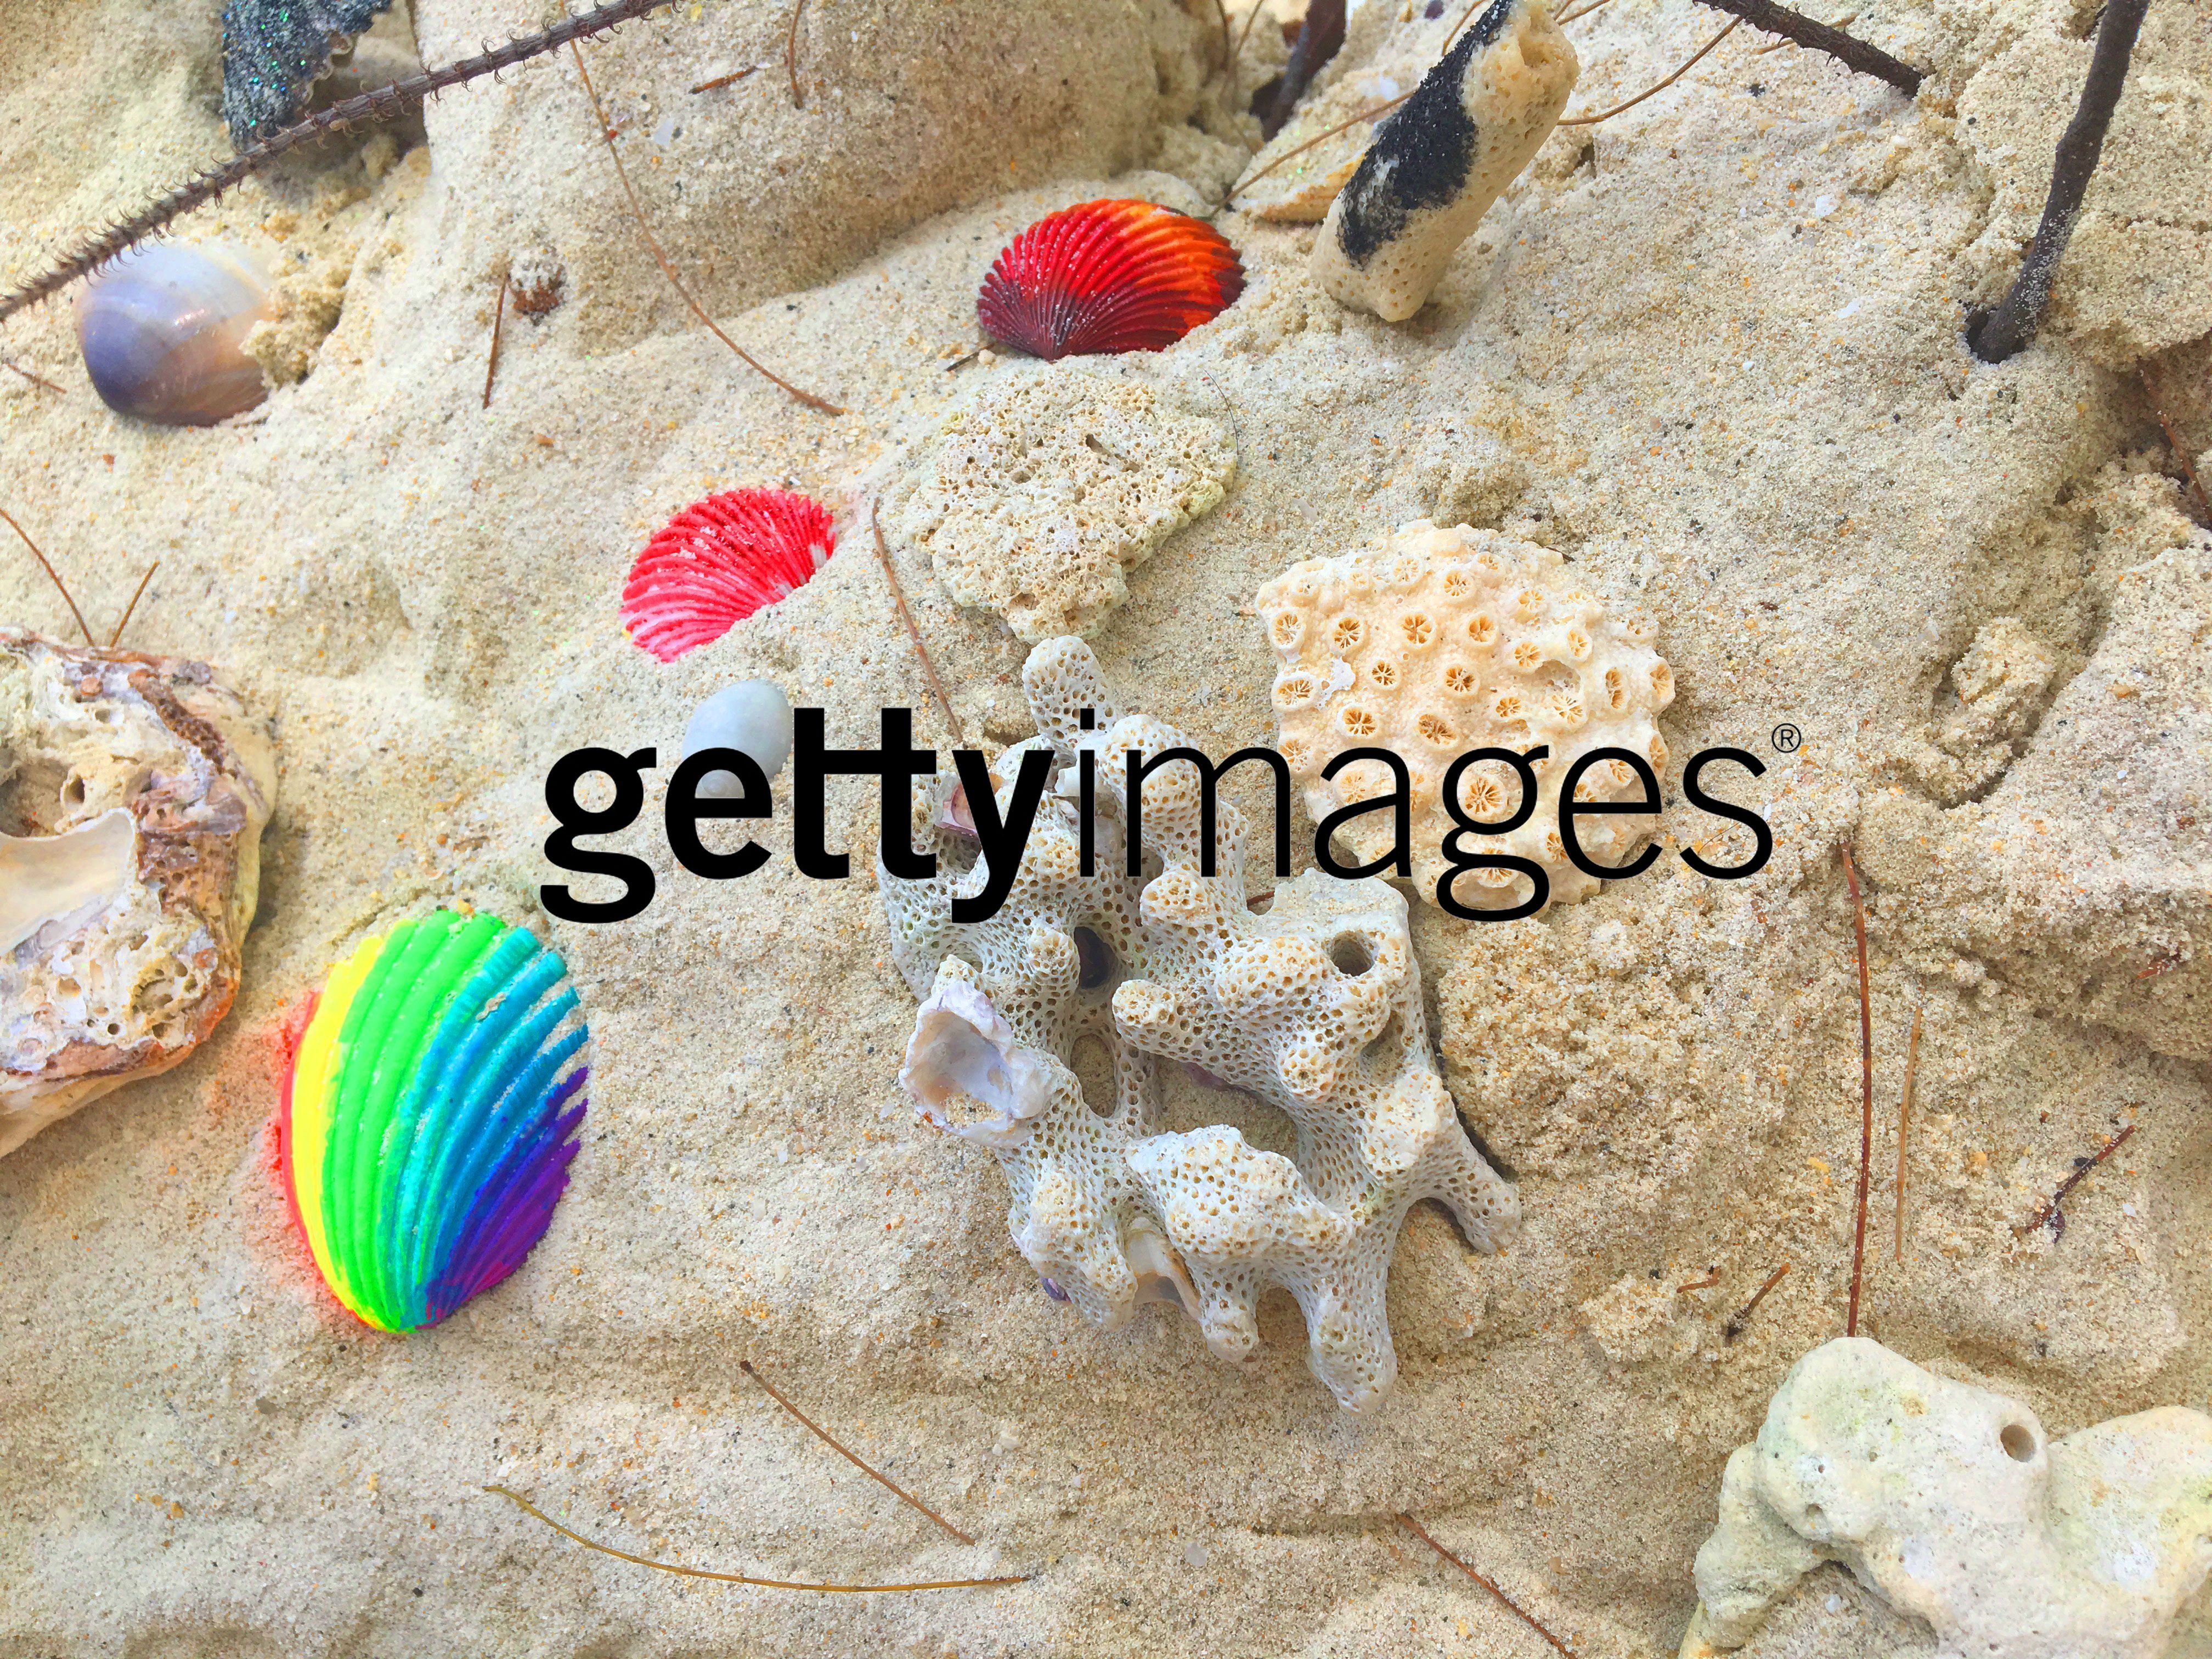 Getty images watermark need to be removed..